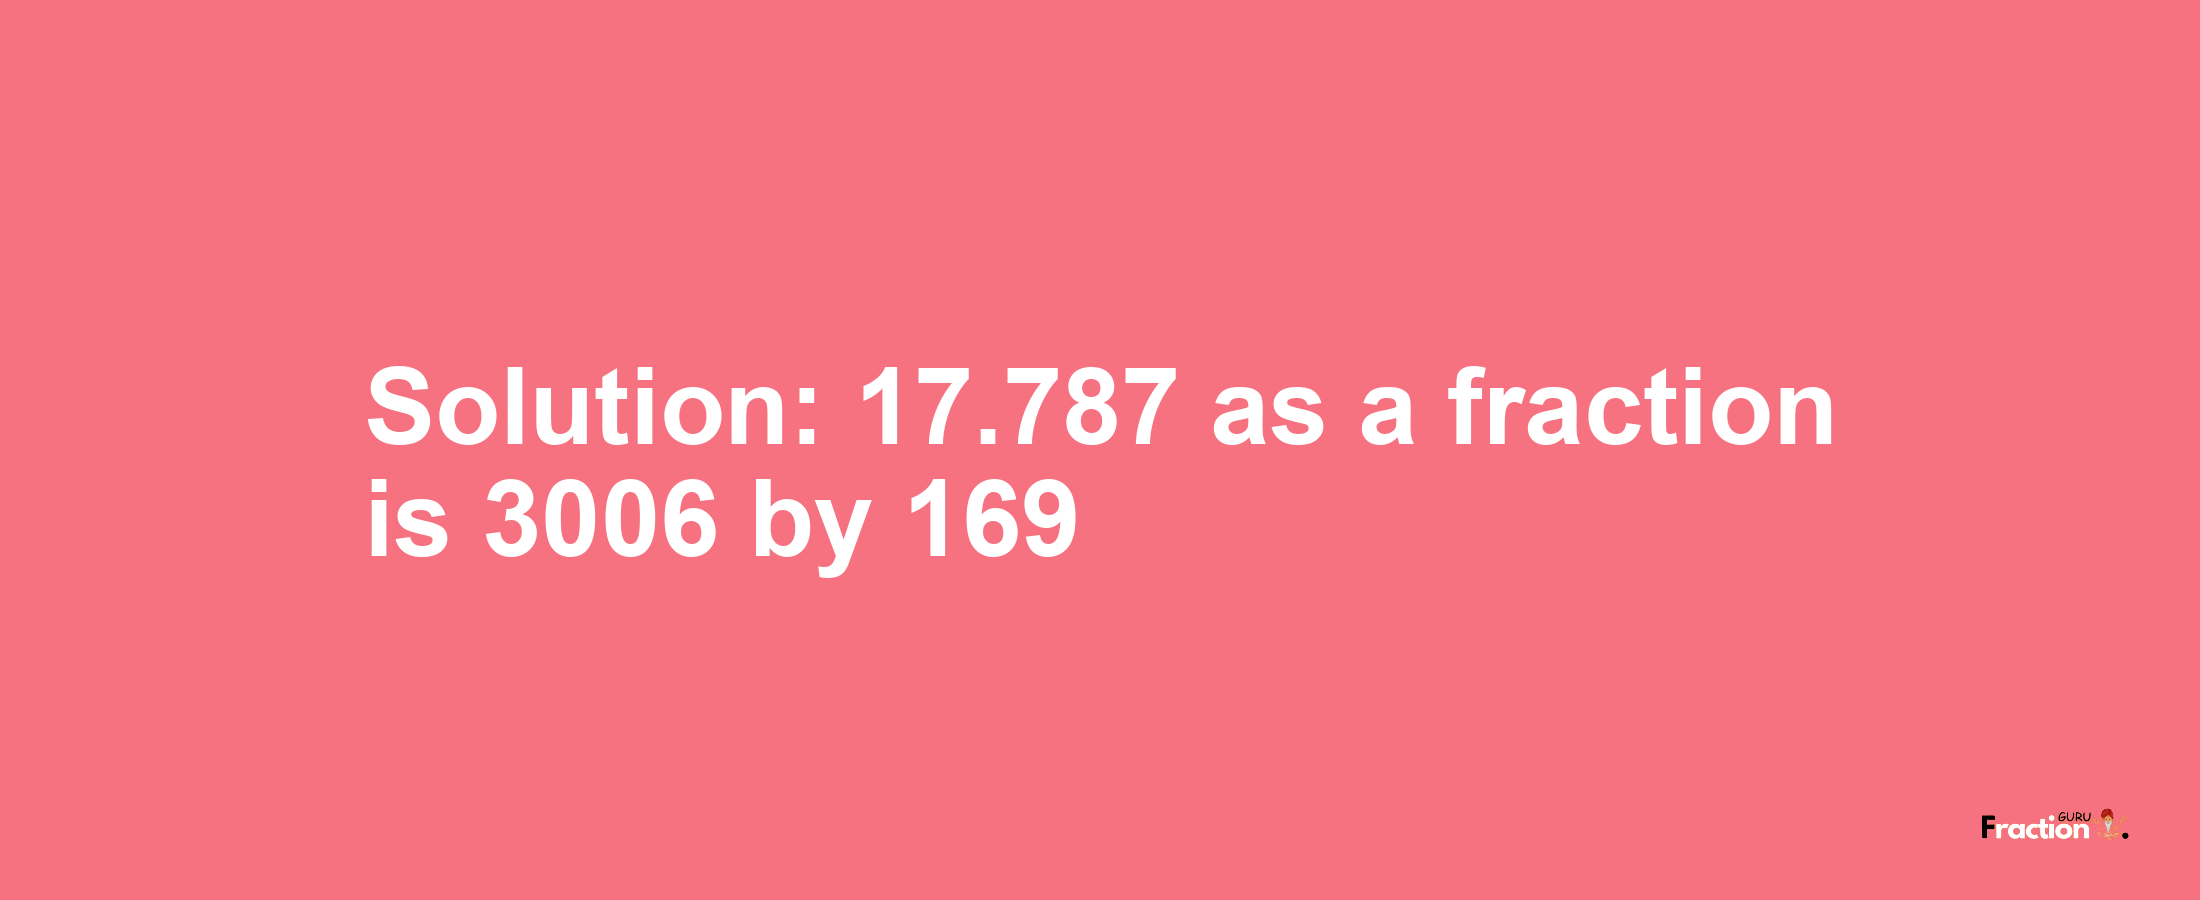 Solution:17.787 as a fraction is 3006/169